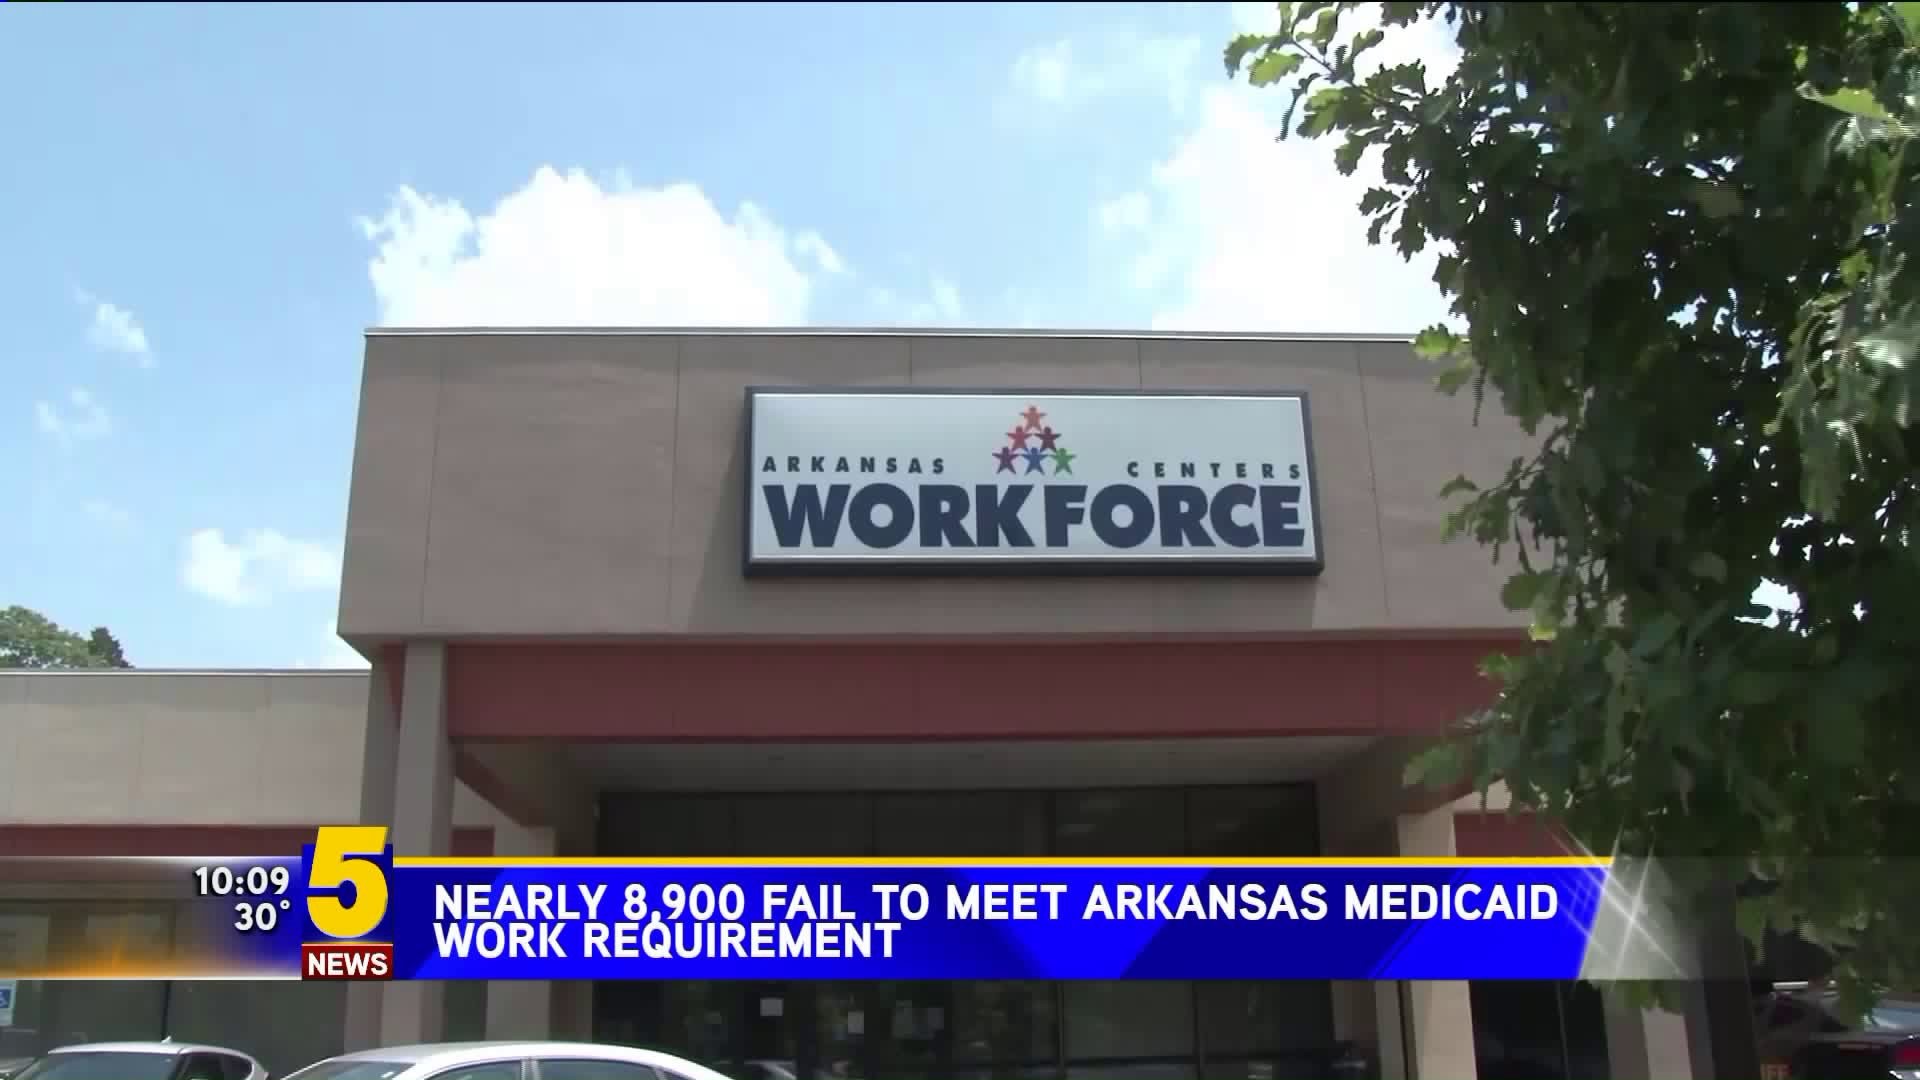 Nearly 8,900 Fail To Meet Arkansas Medicaid Work Requirement